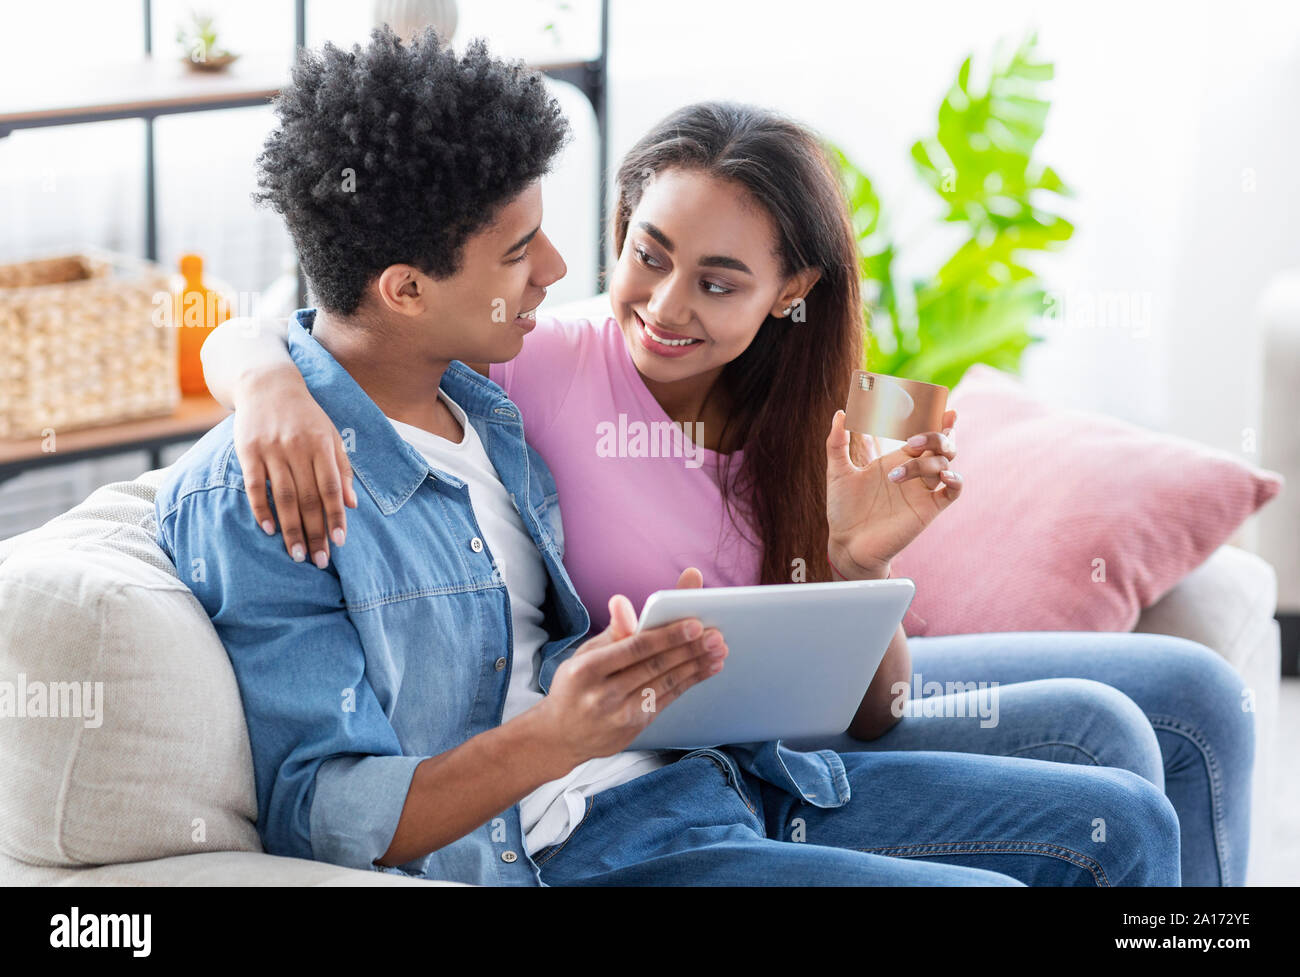 Young Couple Using Tablet And Credit Card At Home Stock Photo